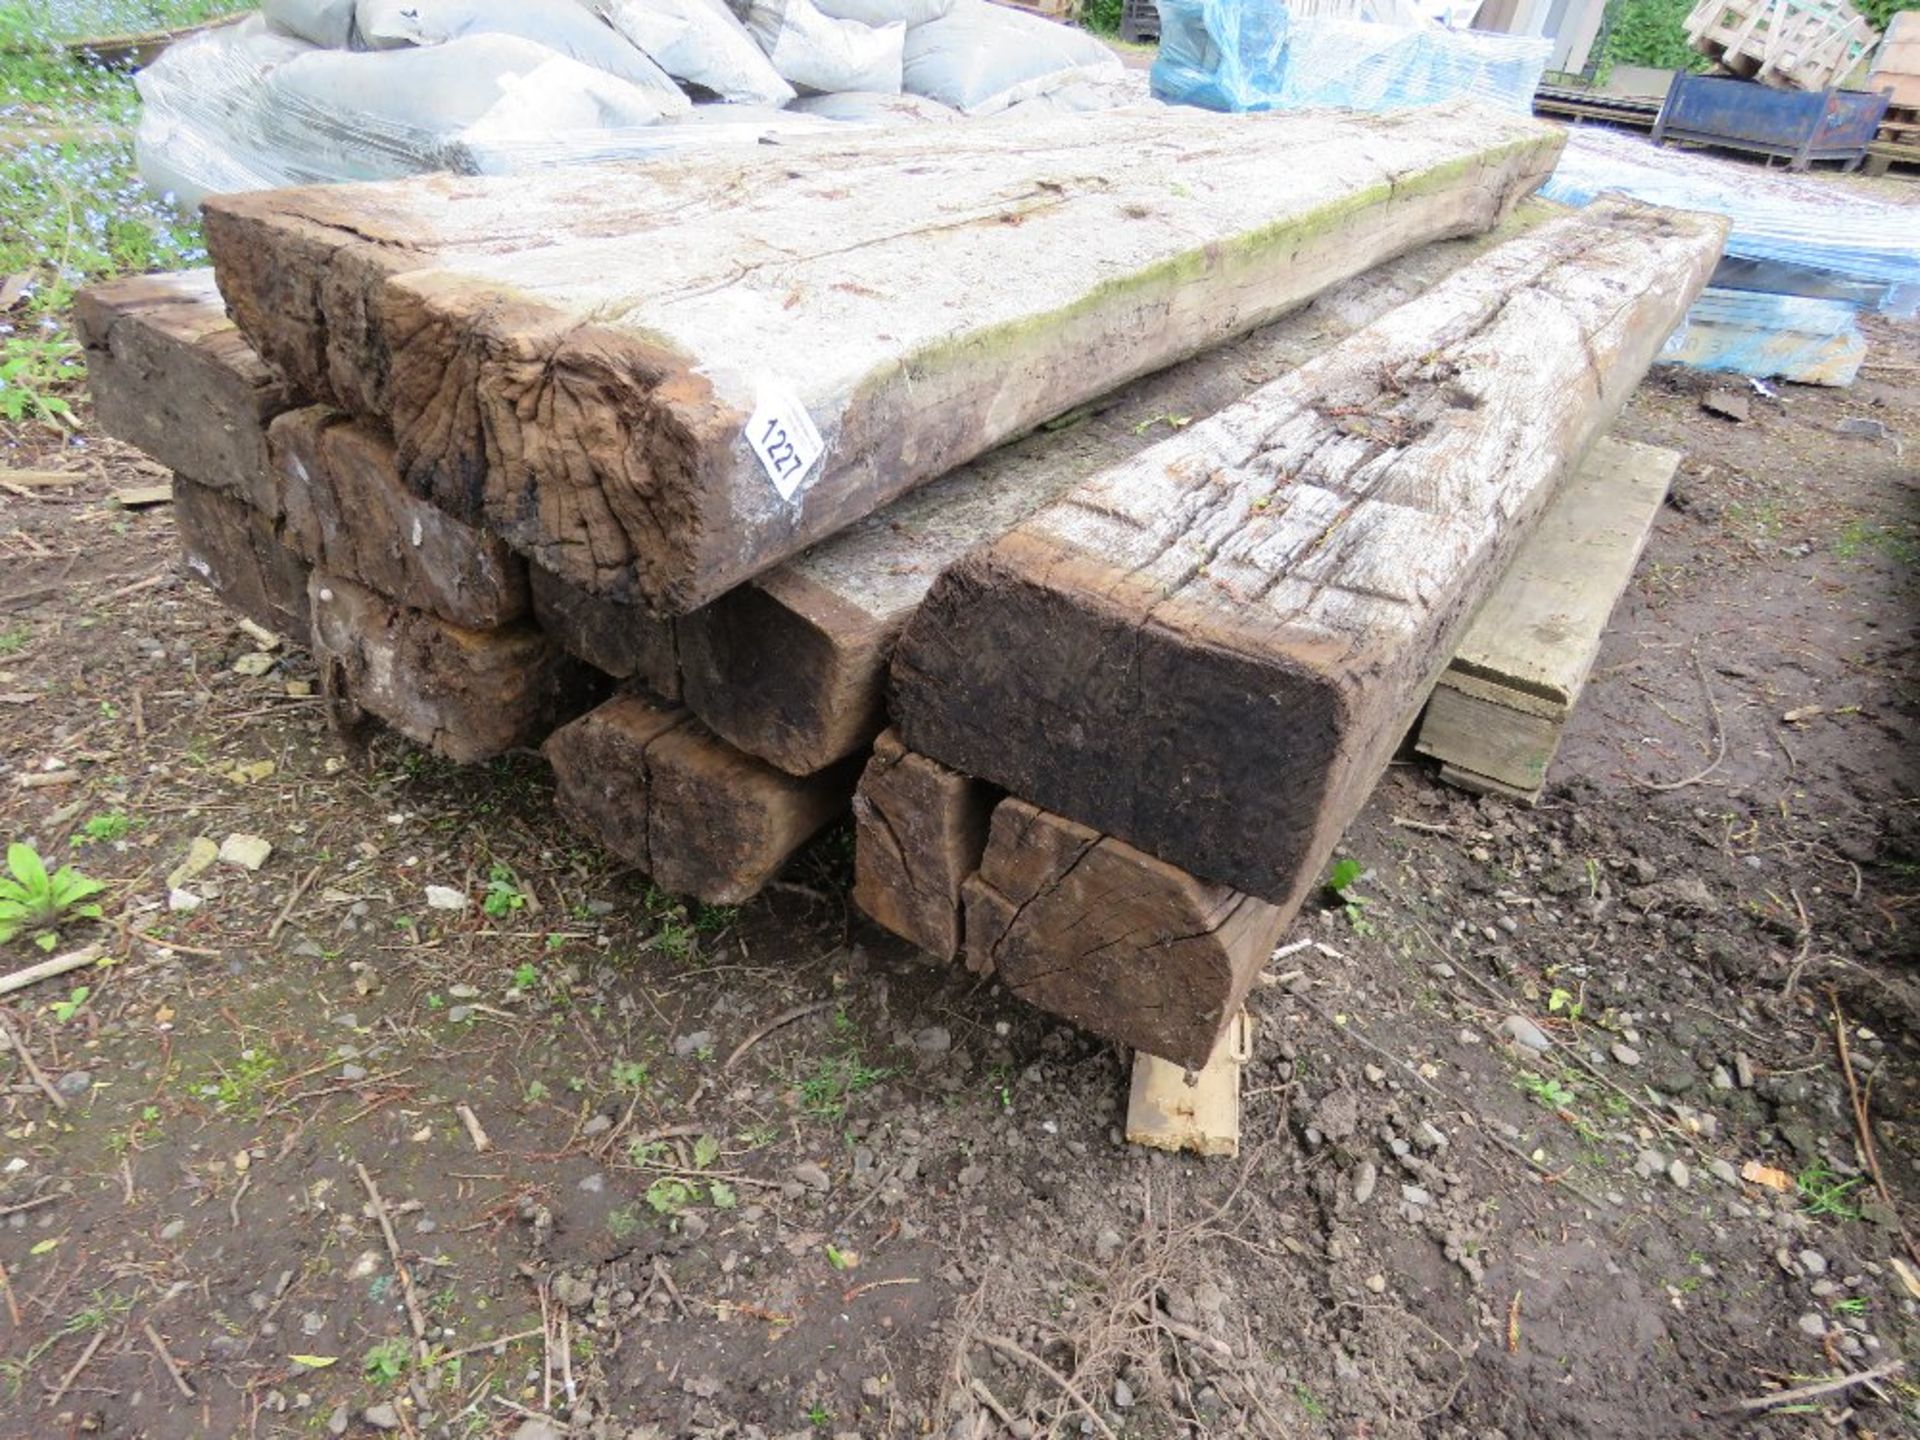 10NO TIMBER RAILWAY SLEEPERS.....THIS LOT IS SOLD UNDER THE AUCTIONEERS MARGIN SCHEME, THEREFORE NO